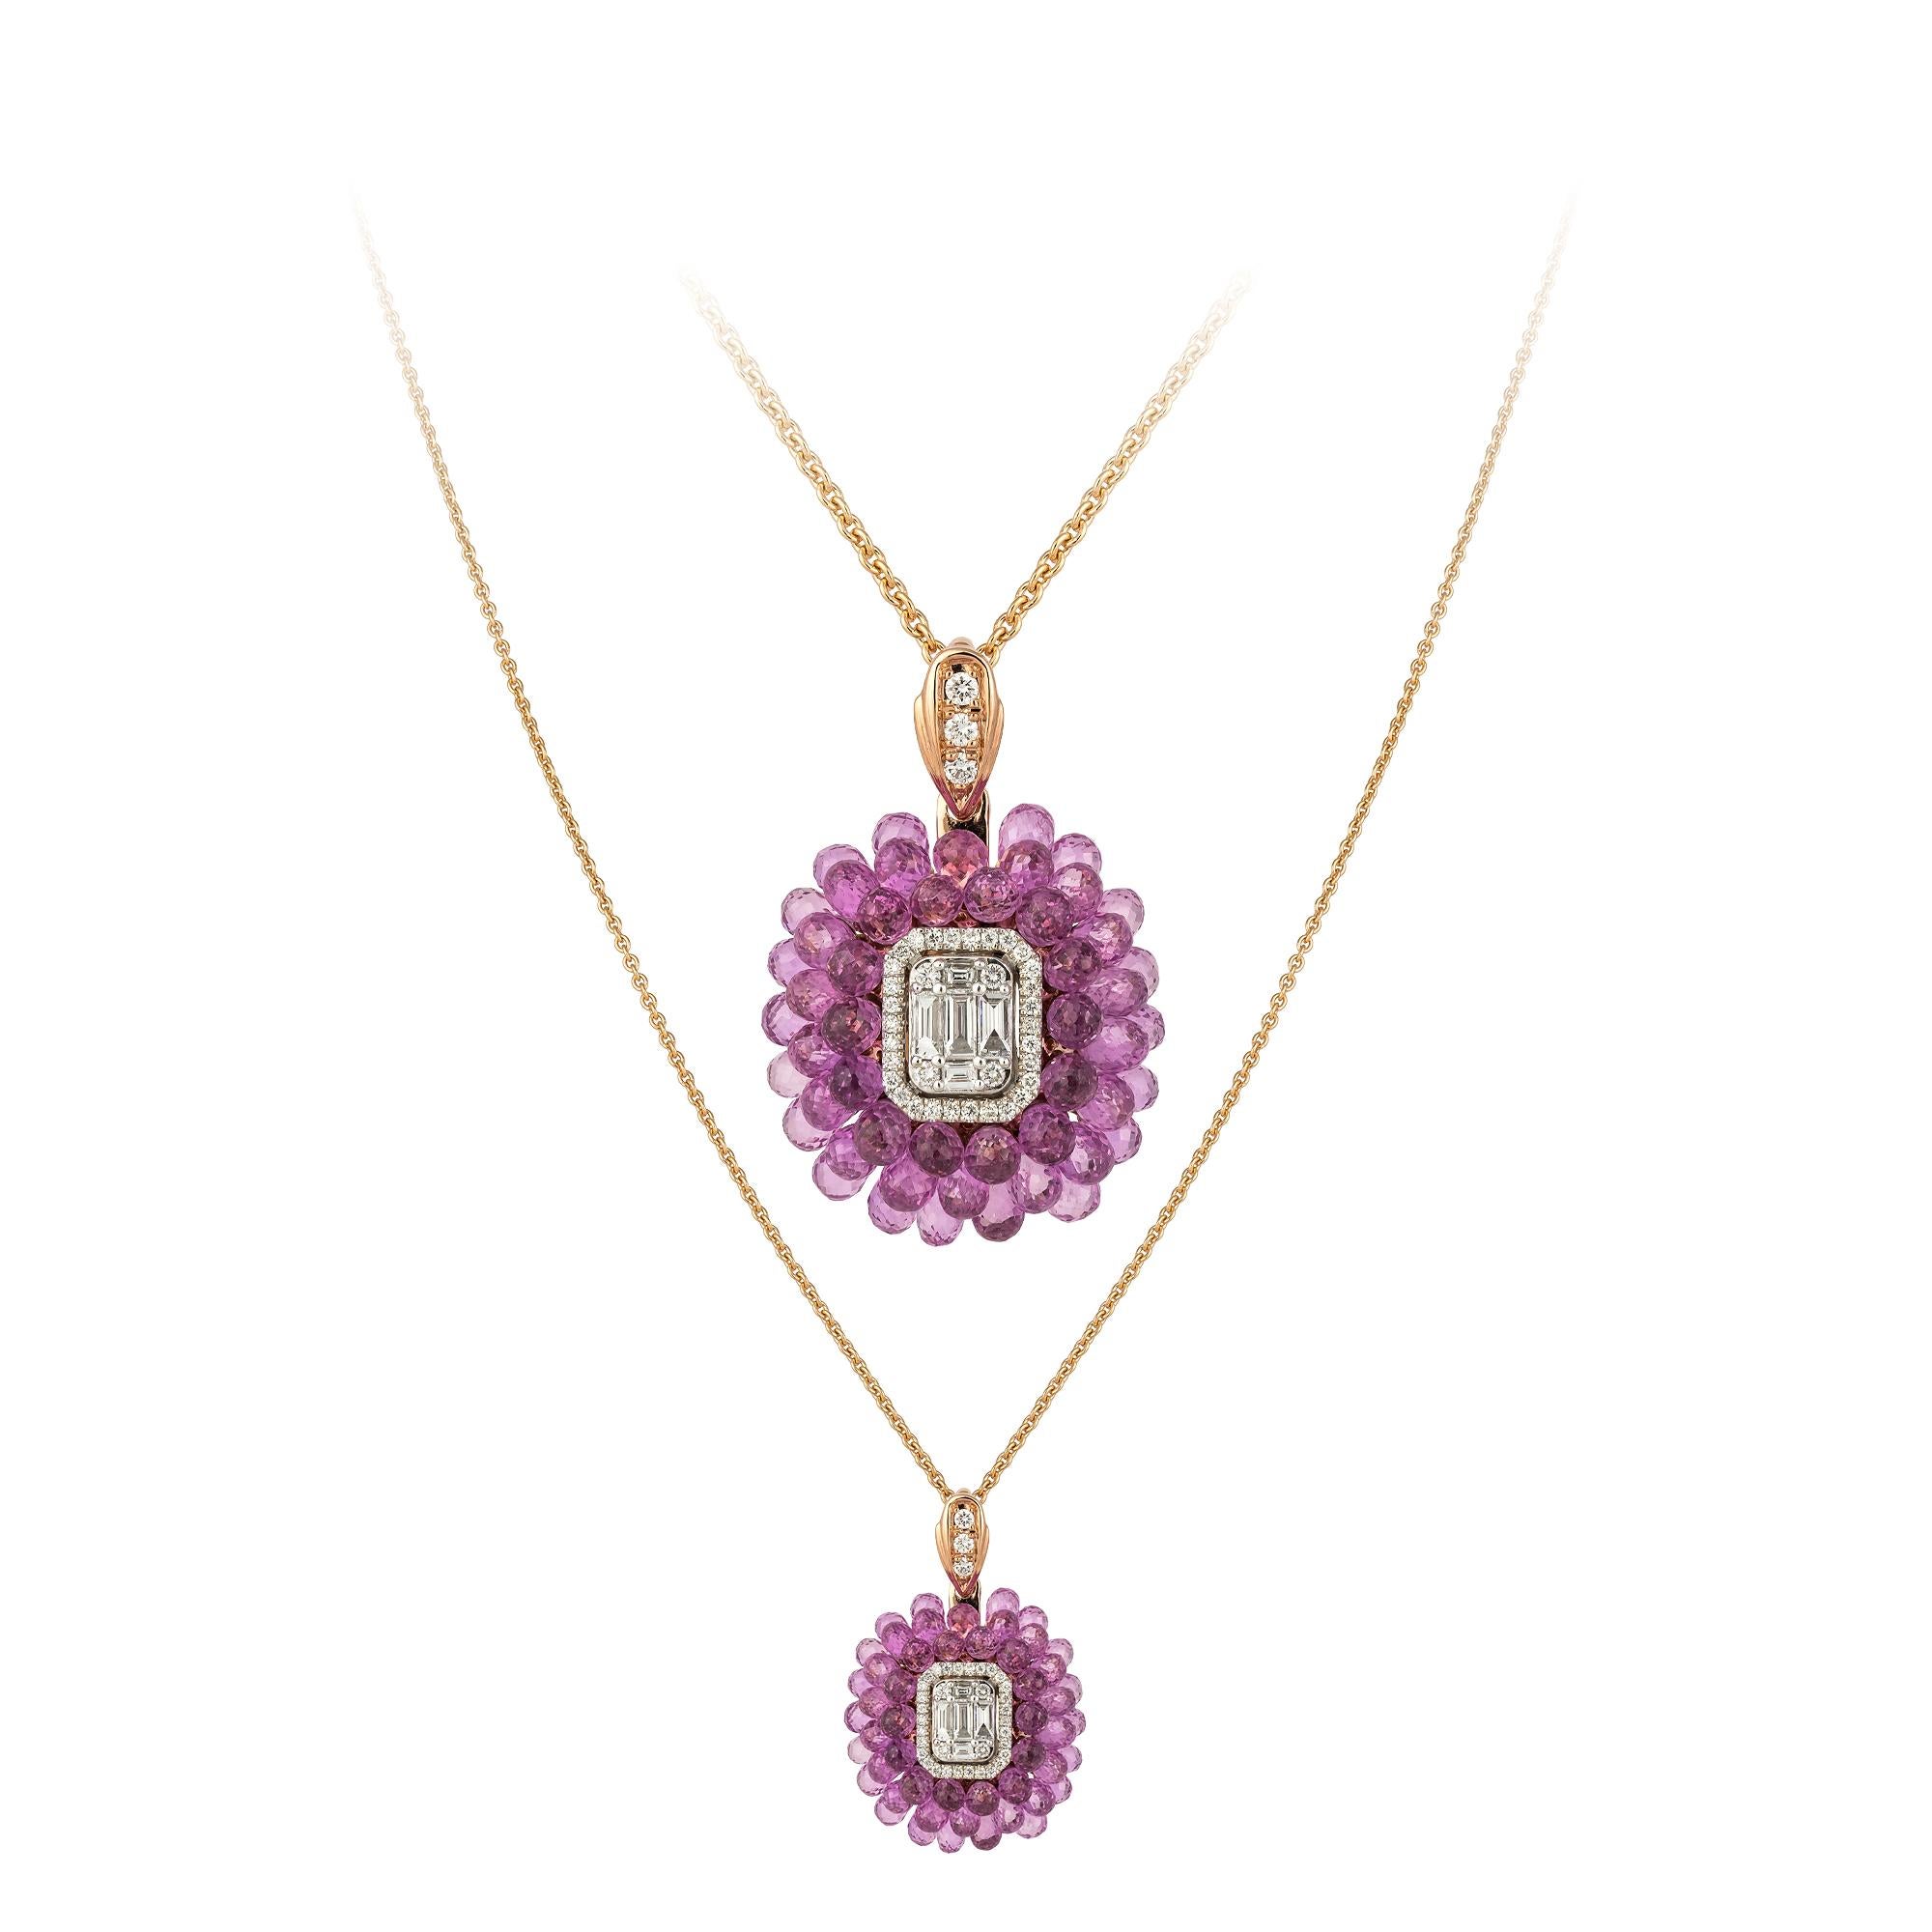 Antique Cushion Cut Impressive Pink Sapphire Diamond 18 Karat White Gold Necklace for Her For Sale